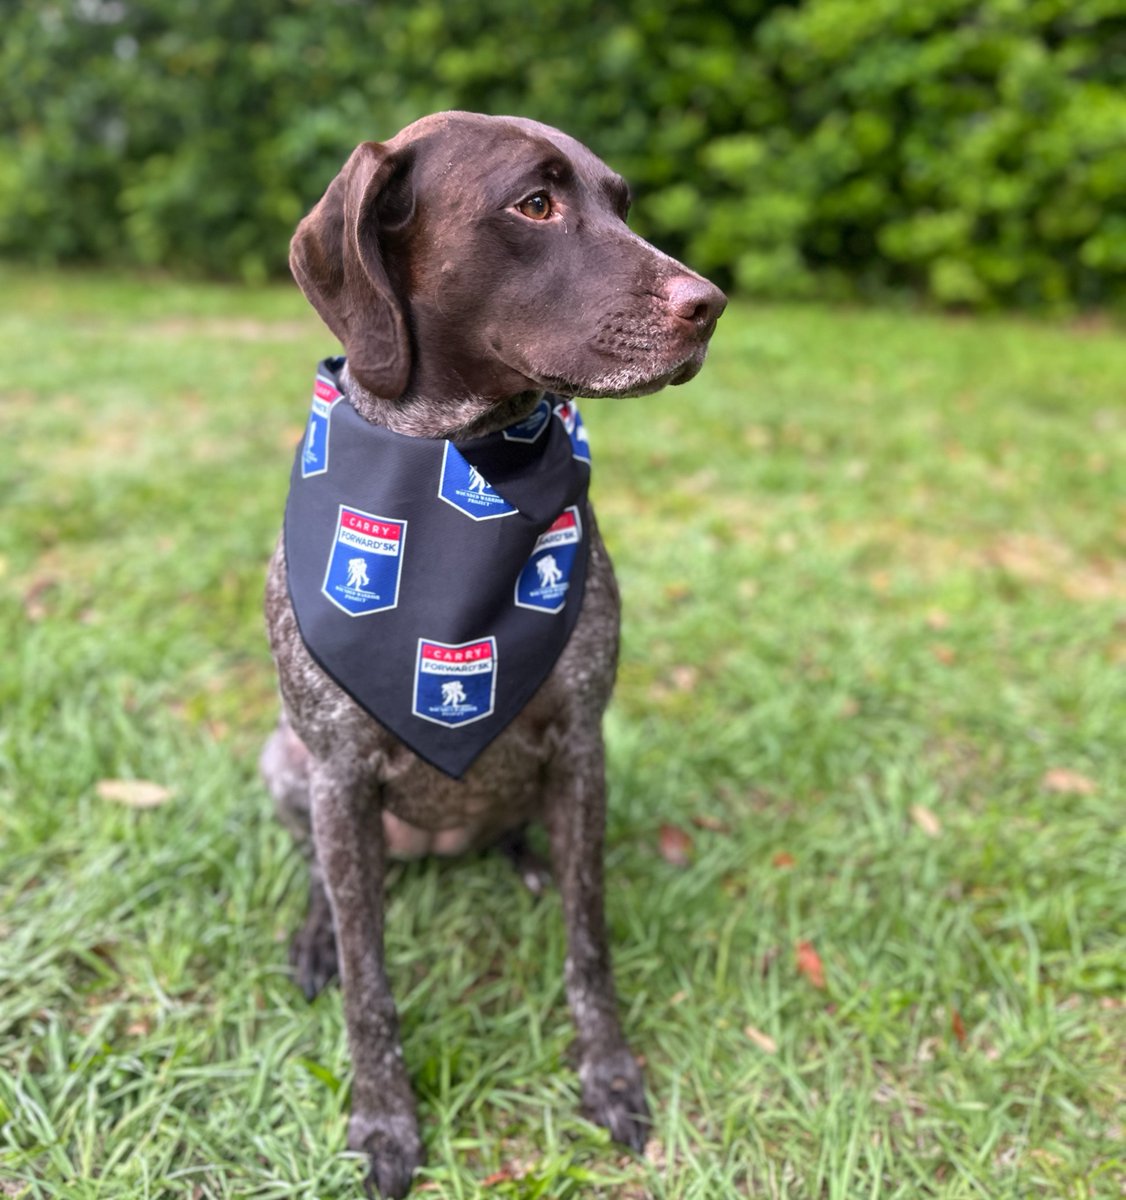 WWP Carry Forward virtual 5K participants can register their dogs for $15 and we'll include an adorable Carry Forward doggie bandana with your participant kit! 🐶 Sign up: wwp.news/3xxyoMb #WWPCarryForward #NationalDogDay (Only available for our virtual 5K.)